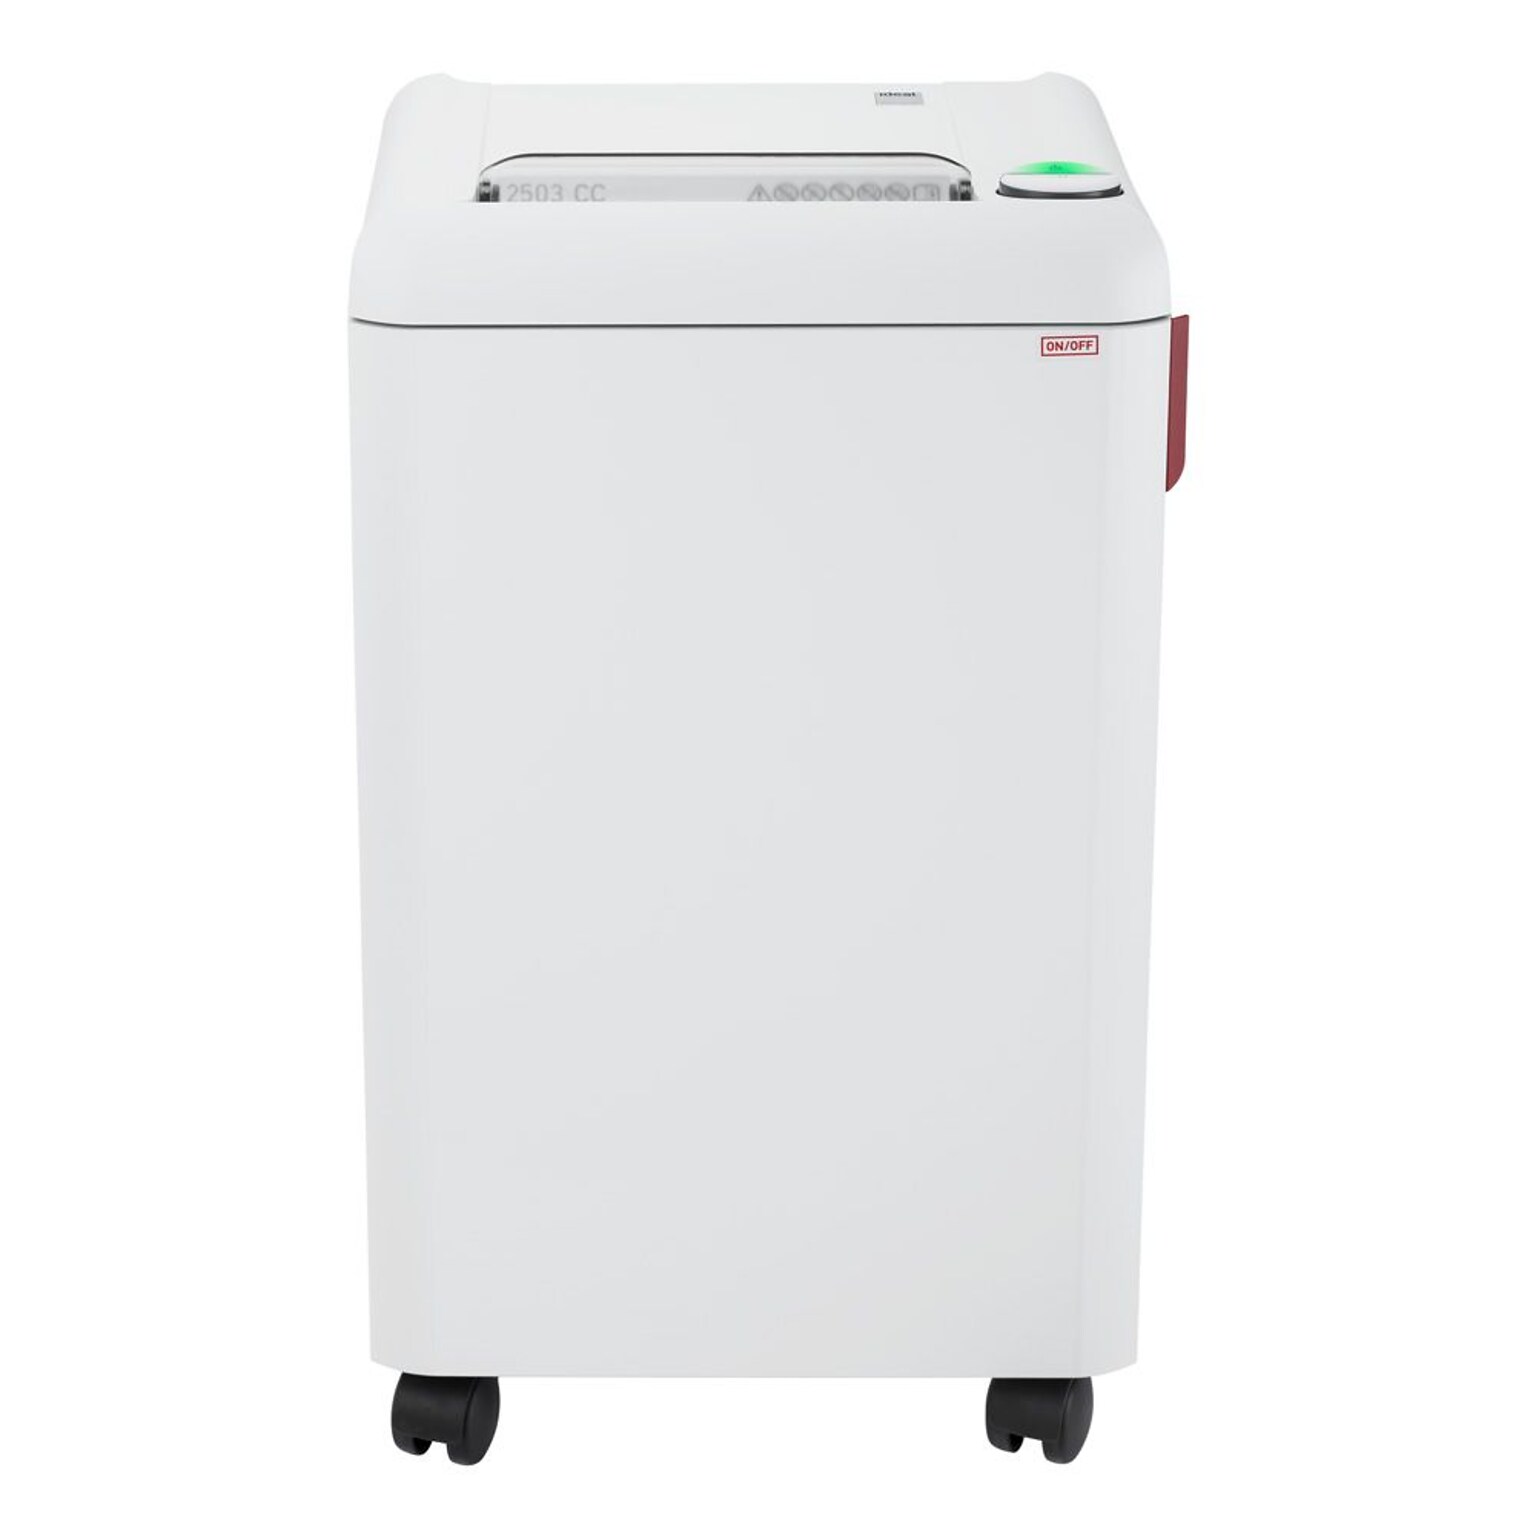 IDEAL 2503 Centralized Office, 14-Sheet Capacity Cross Cut Continuous Operation, P-4 Shredder (IDEDSH0302H)